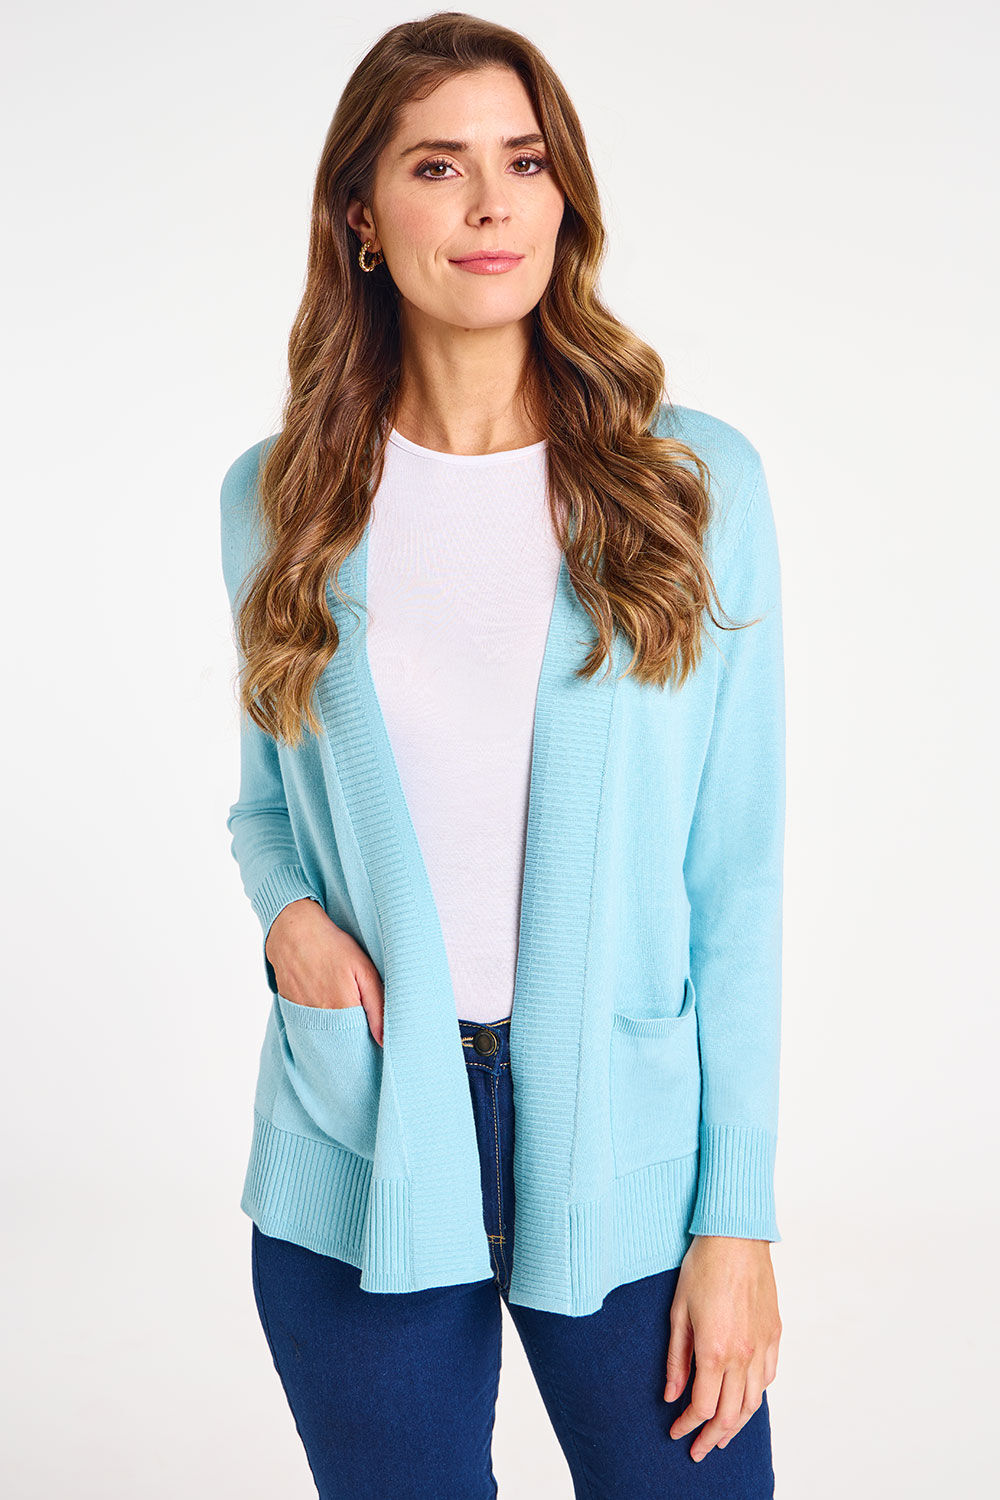 Bonmarche Mint Edge to Edge Cardigan With Pockets, Size: 28